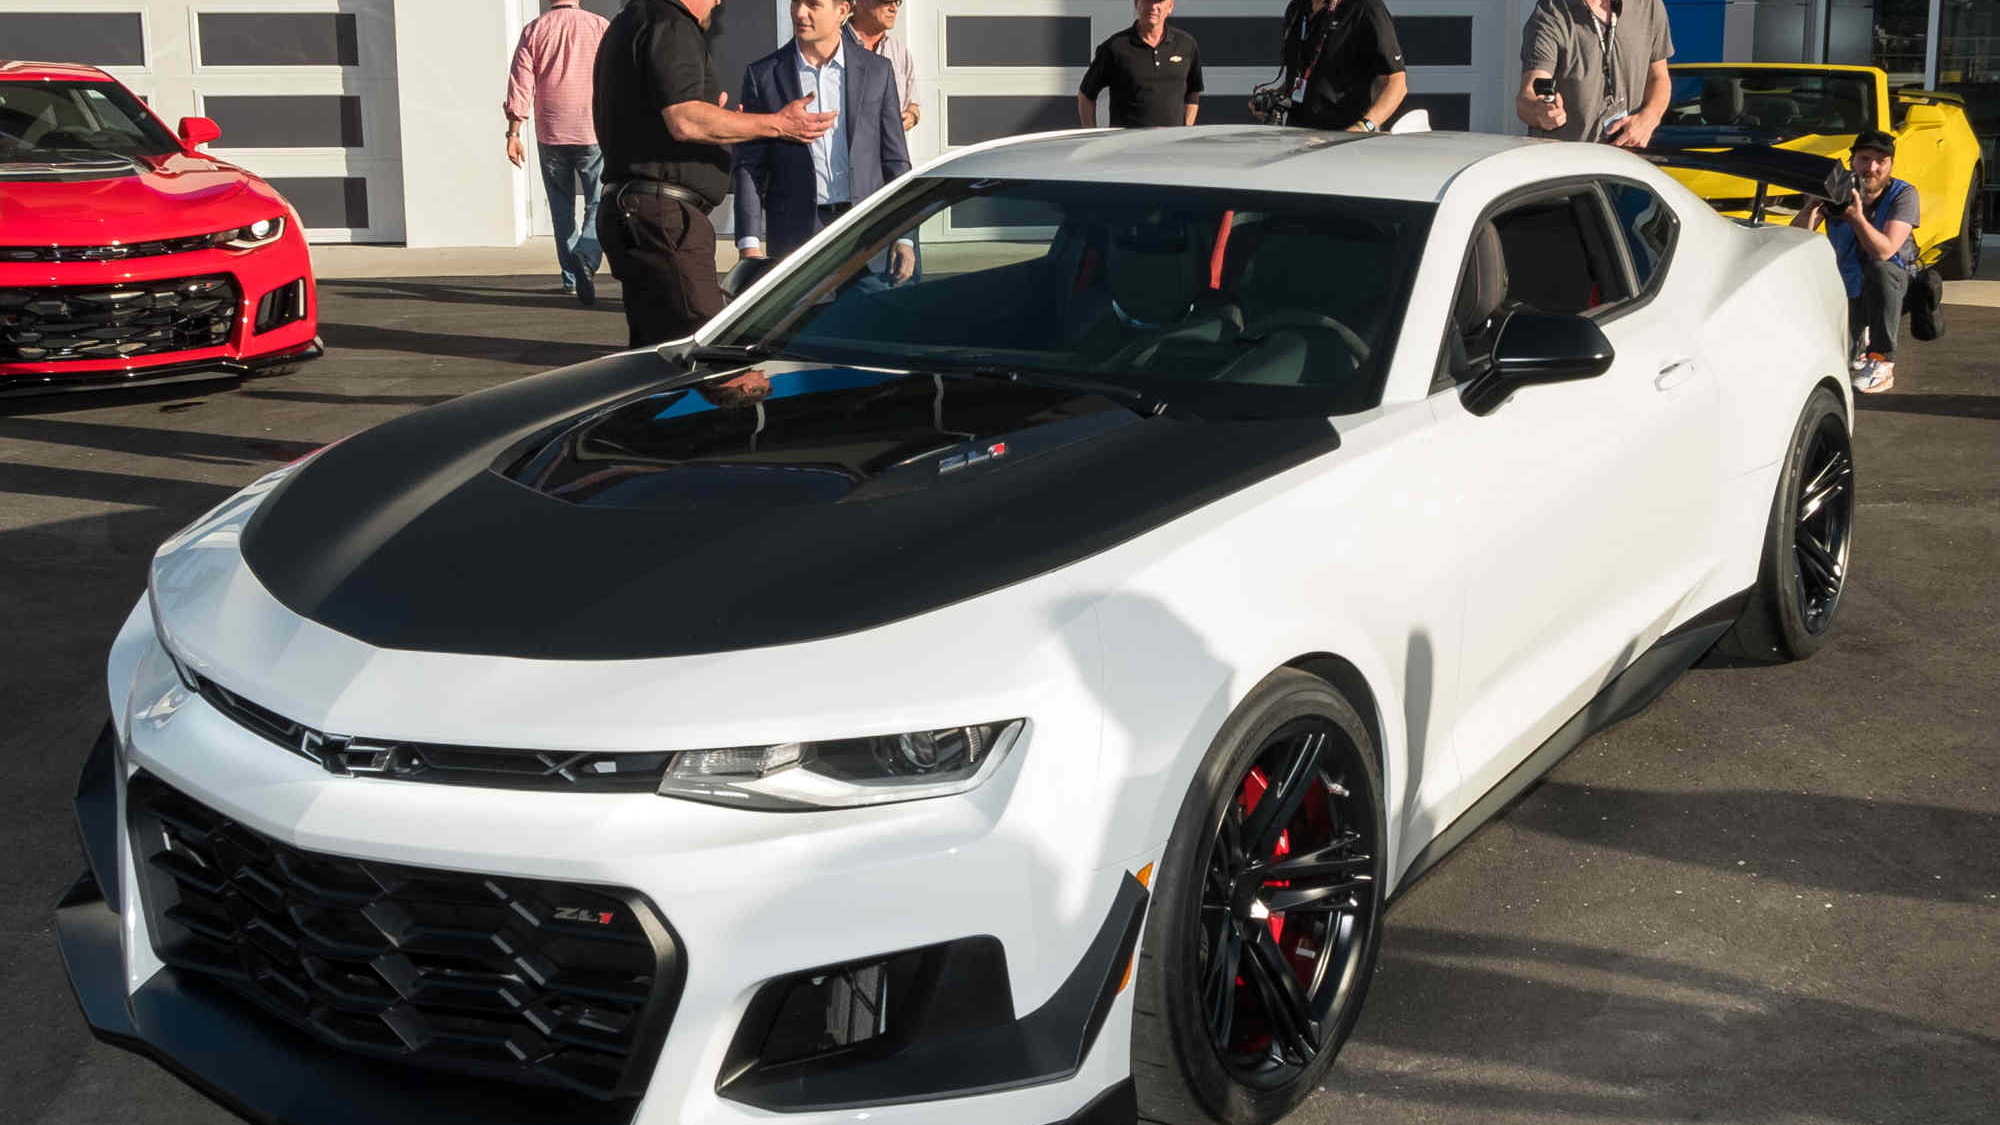 2018 Chevrolet Camaro ZL1 1LE priced from $69,995